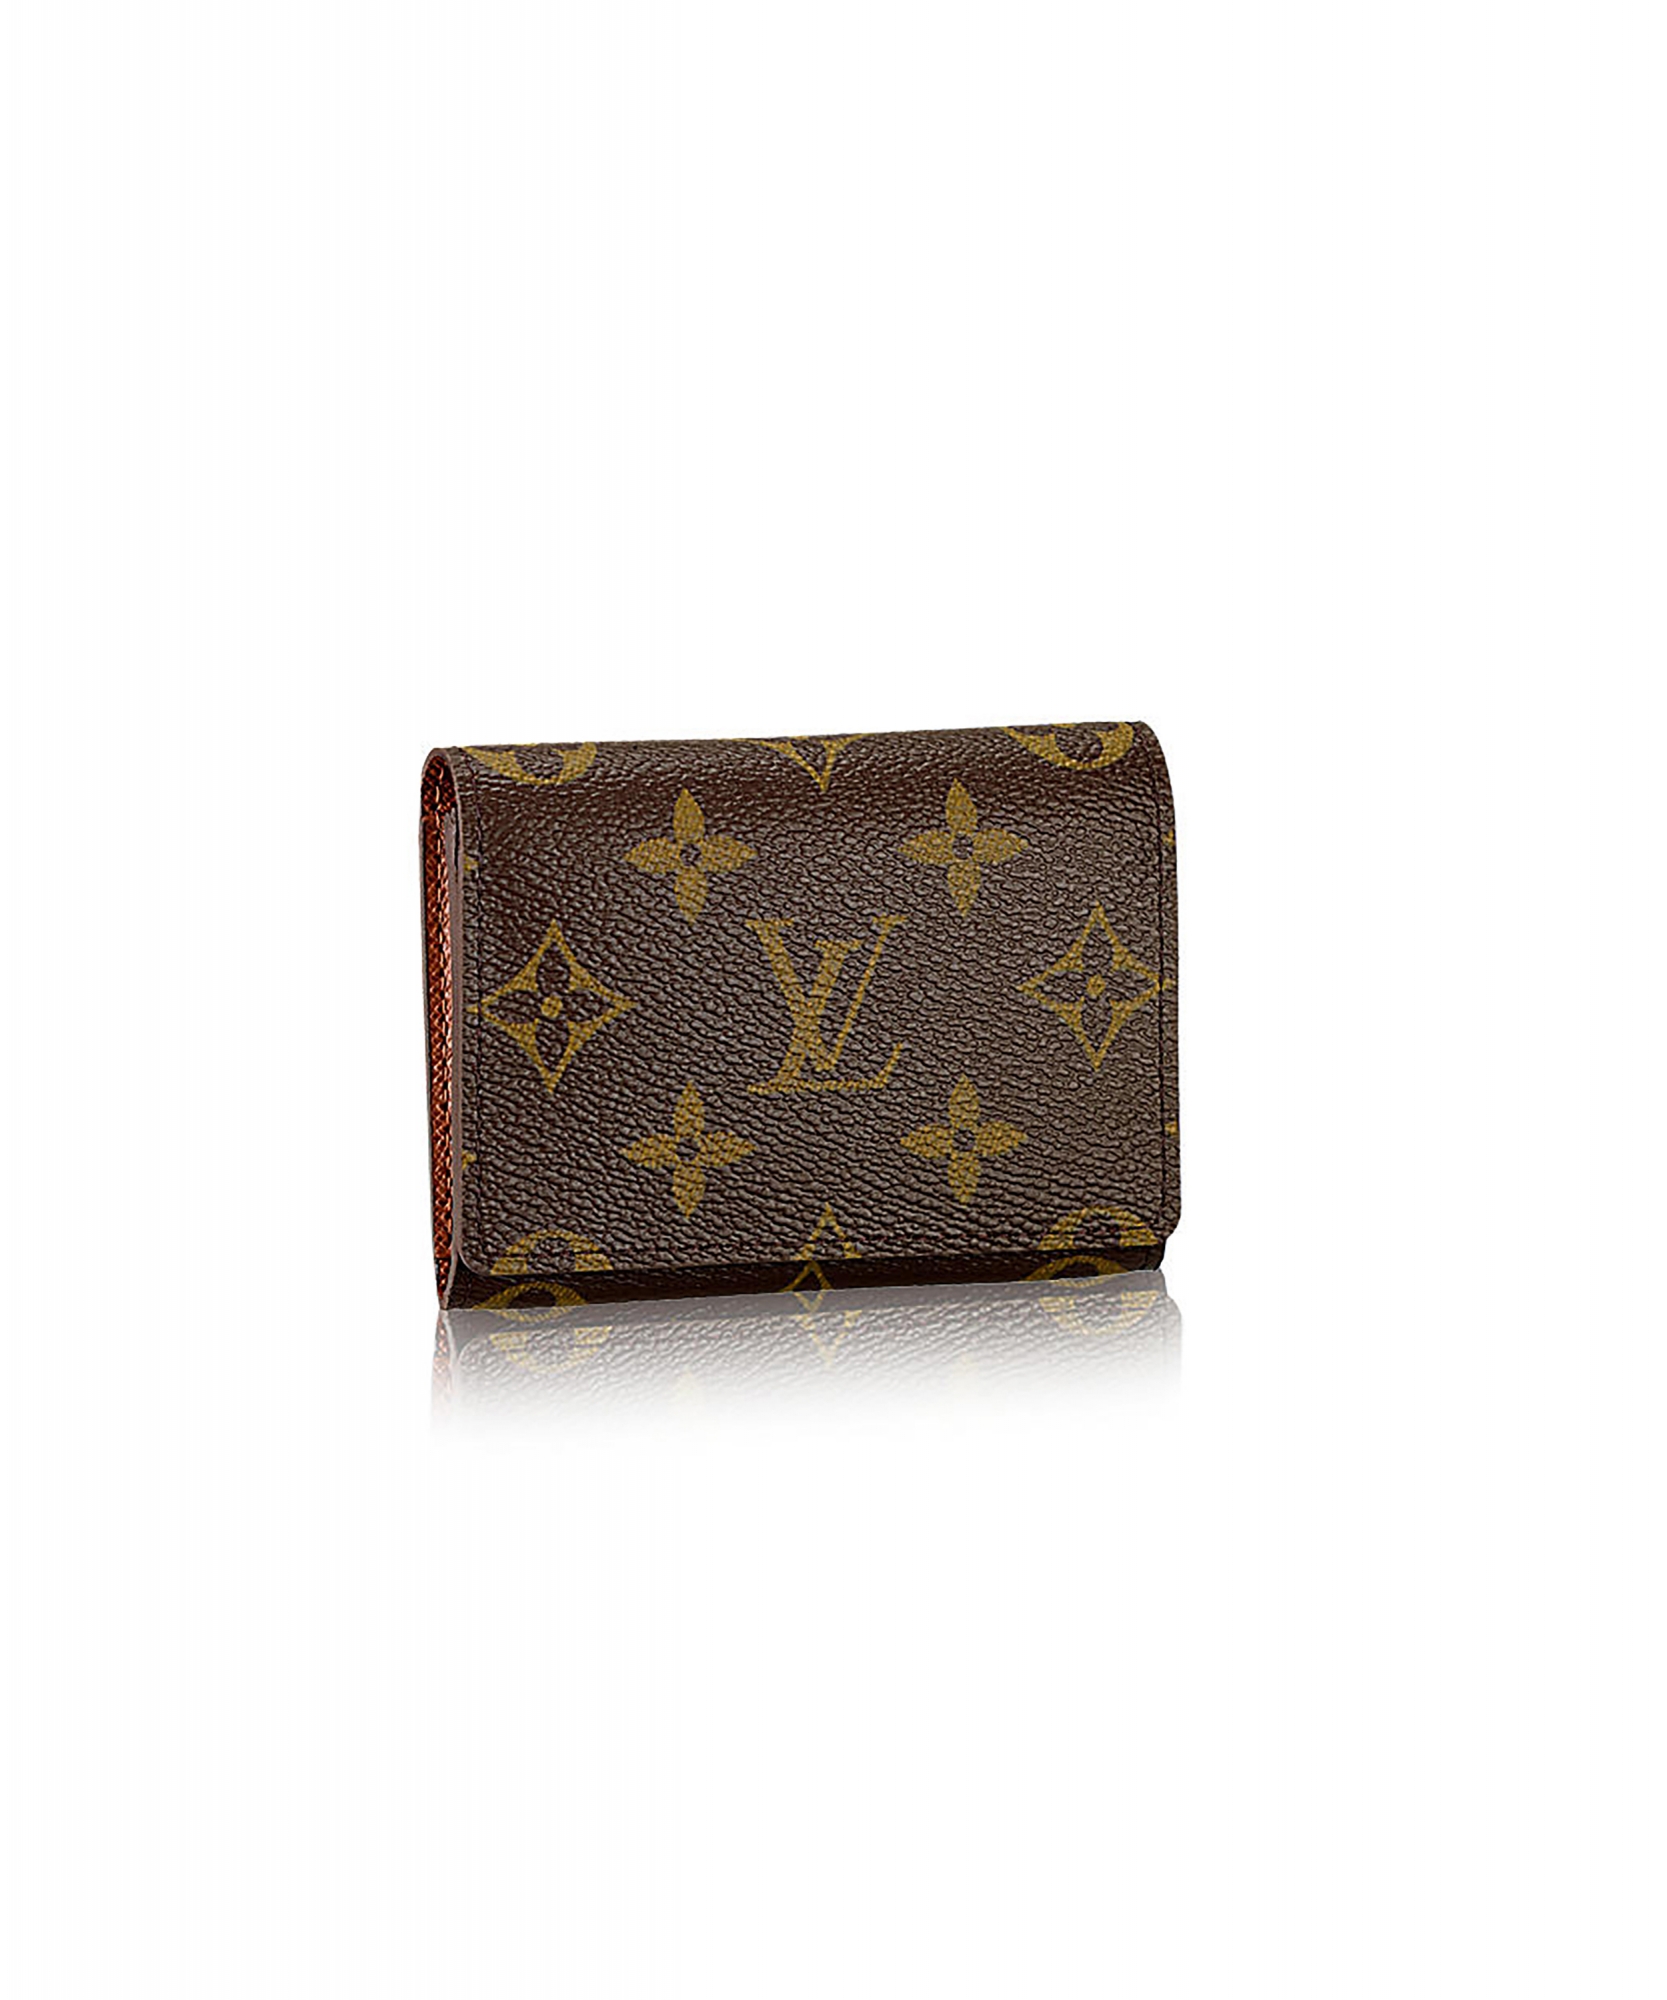 Louis Vuitton Business Card Holder personalised with my initials, cherished  birthday present, FrenchStef